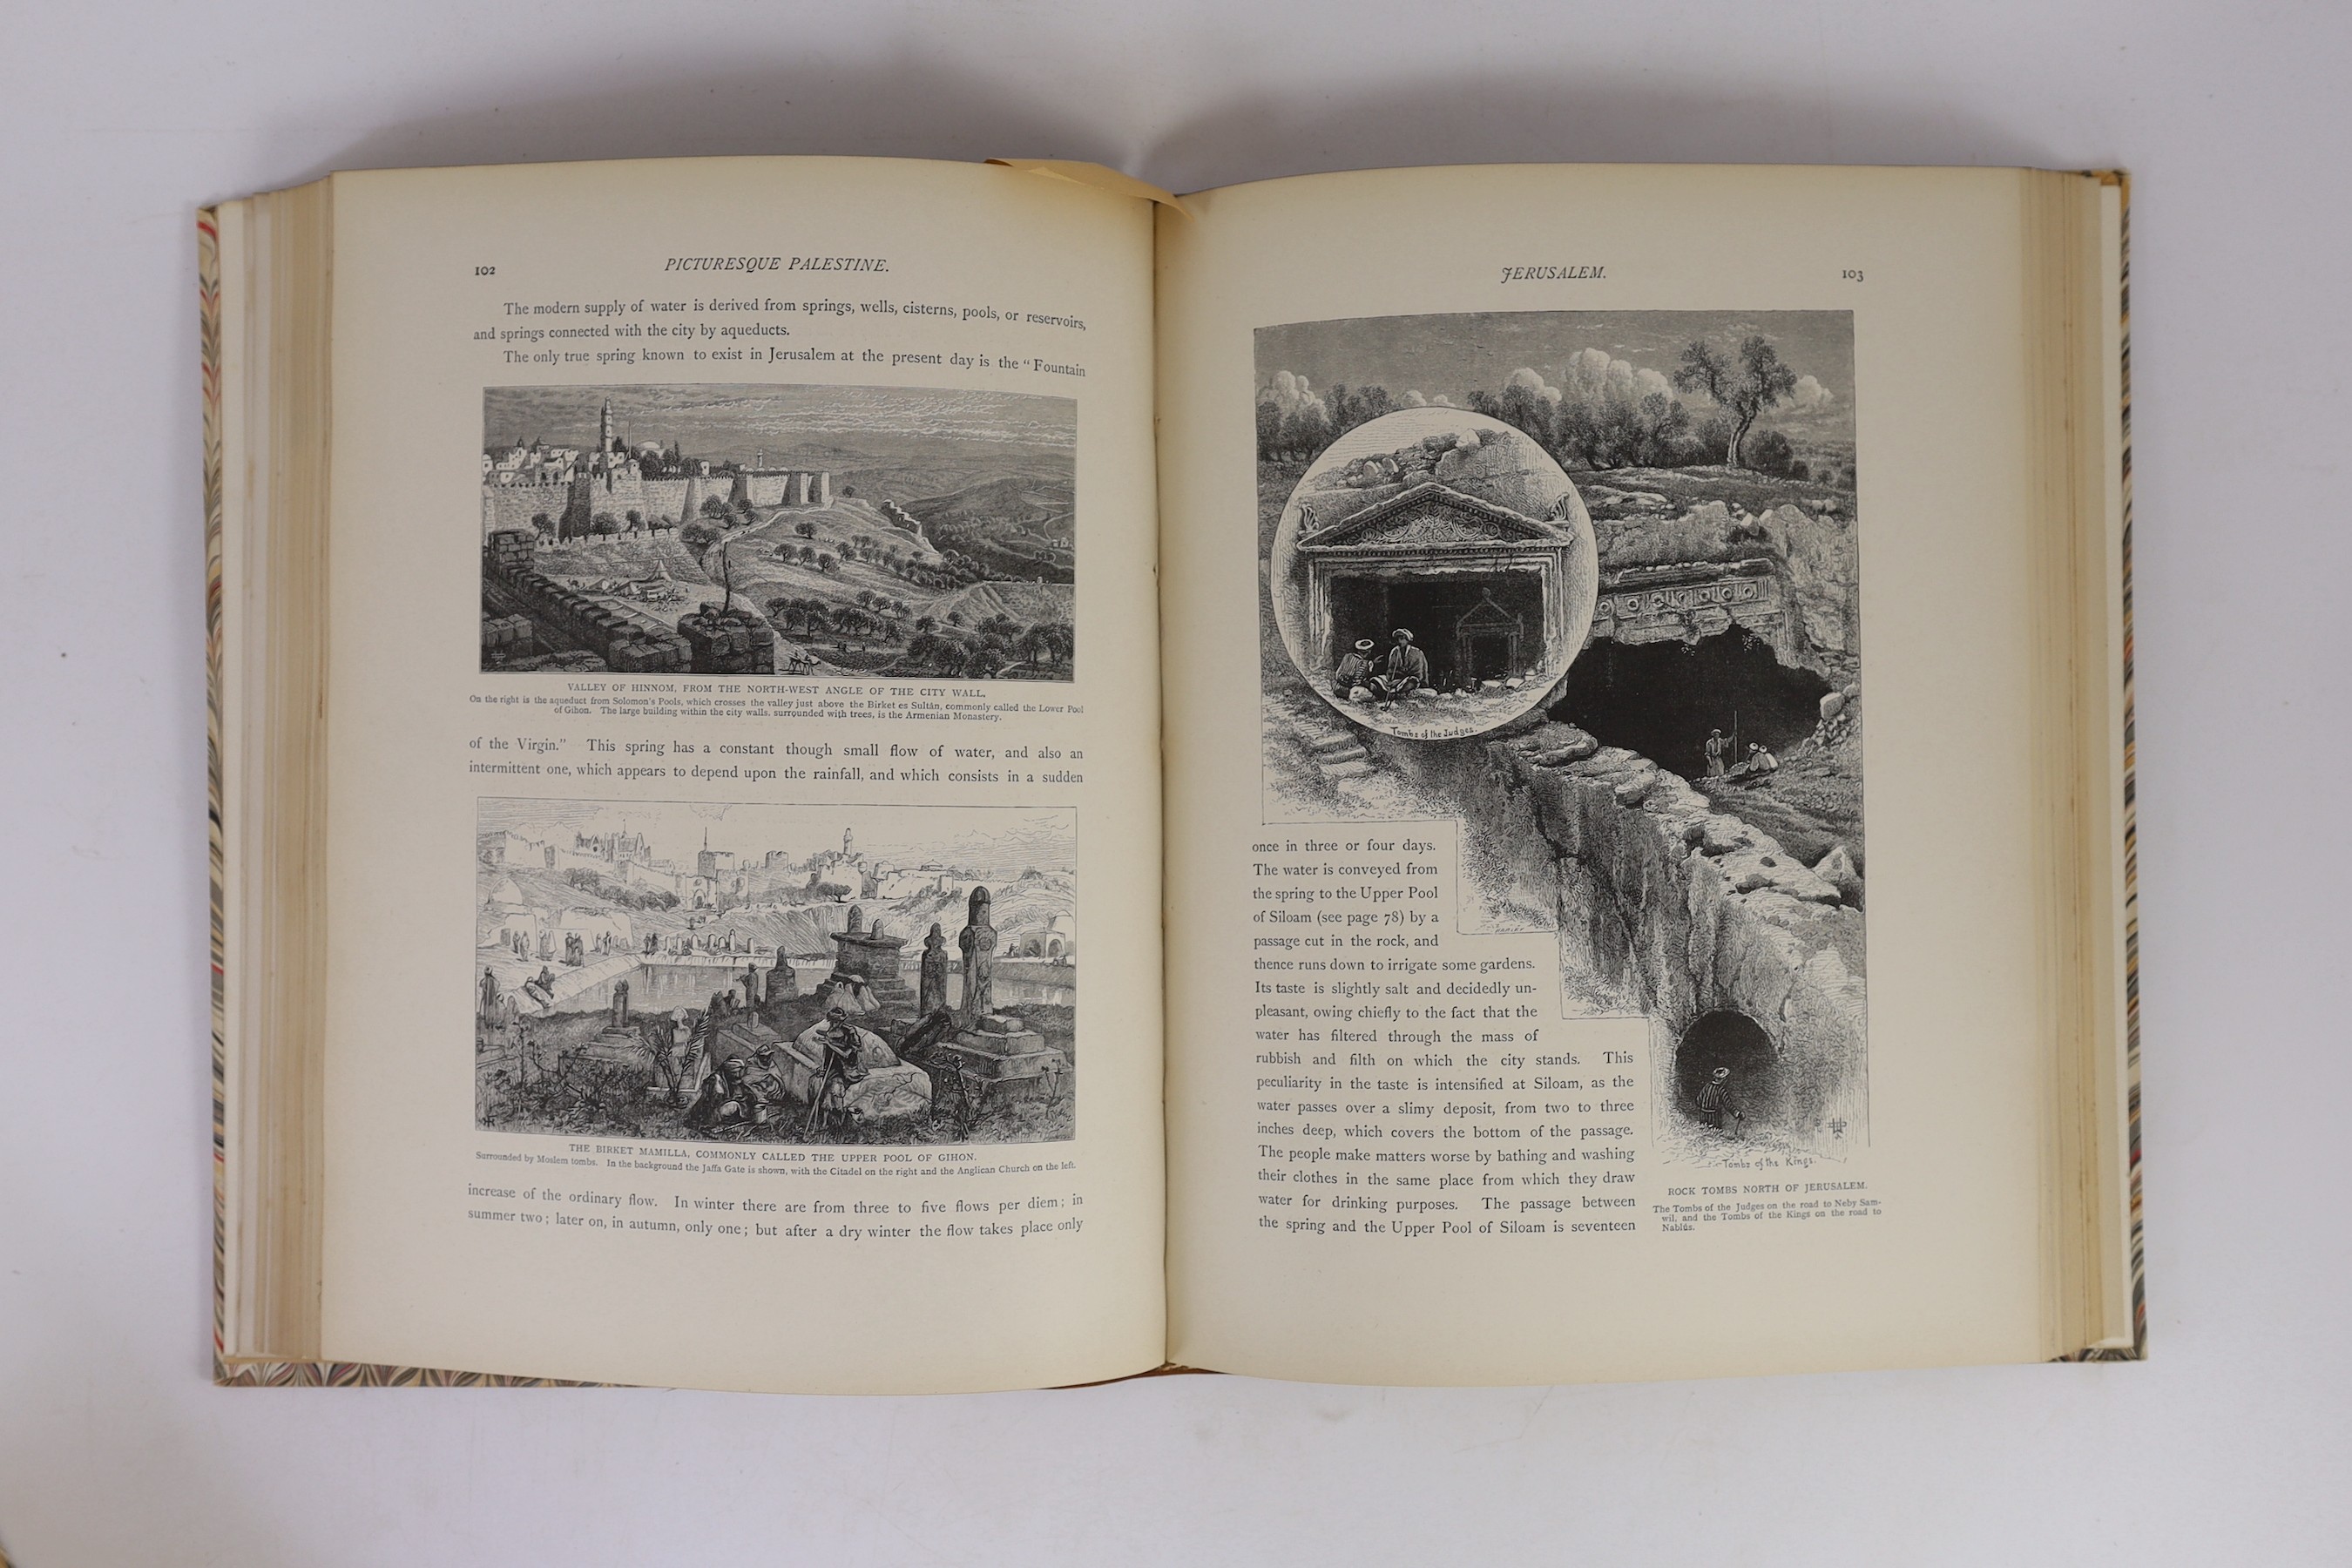 Wilson, Sir Charles (editor) - Picturesque Palestine, Sinai and Egypt. 4 vols. pictorial engraved & printed titles, many illus. throughout (incl. steel-engraved plates), 2 d-page maps; rebound calf backed marbled boards,